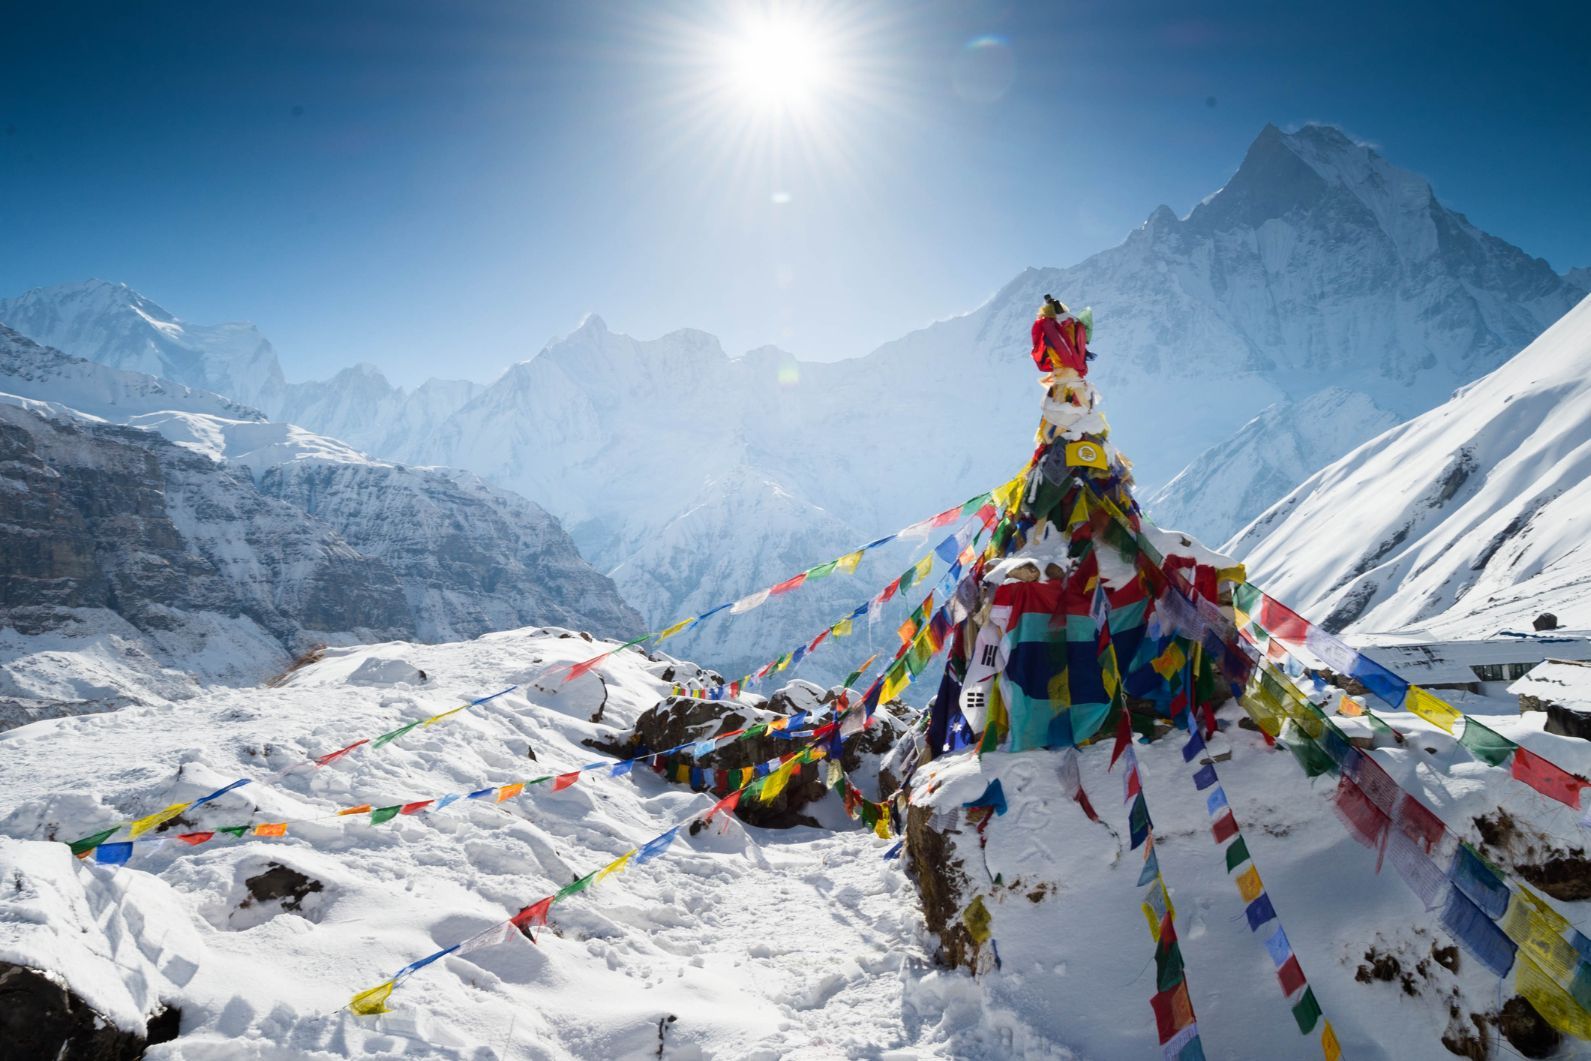 A stunning, snowy high-altitude view from Annapurna Base Camp, with prayer flags in the foreground.